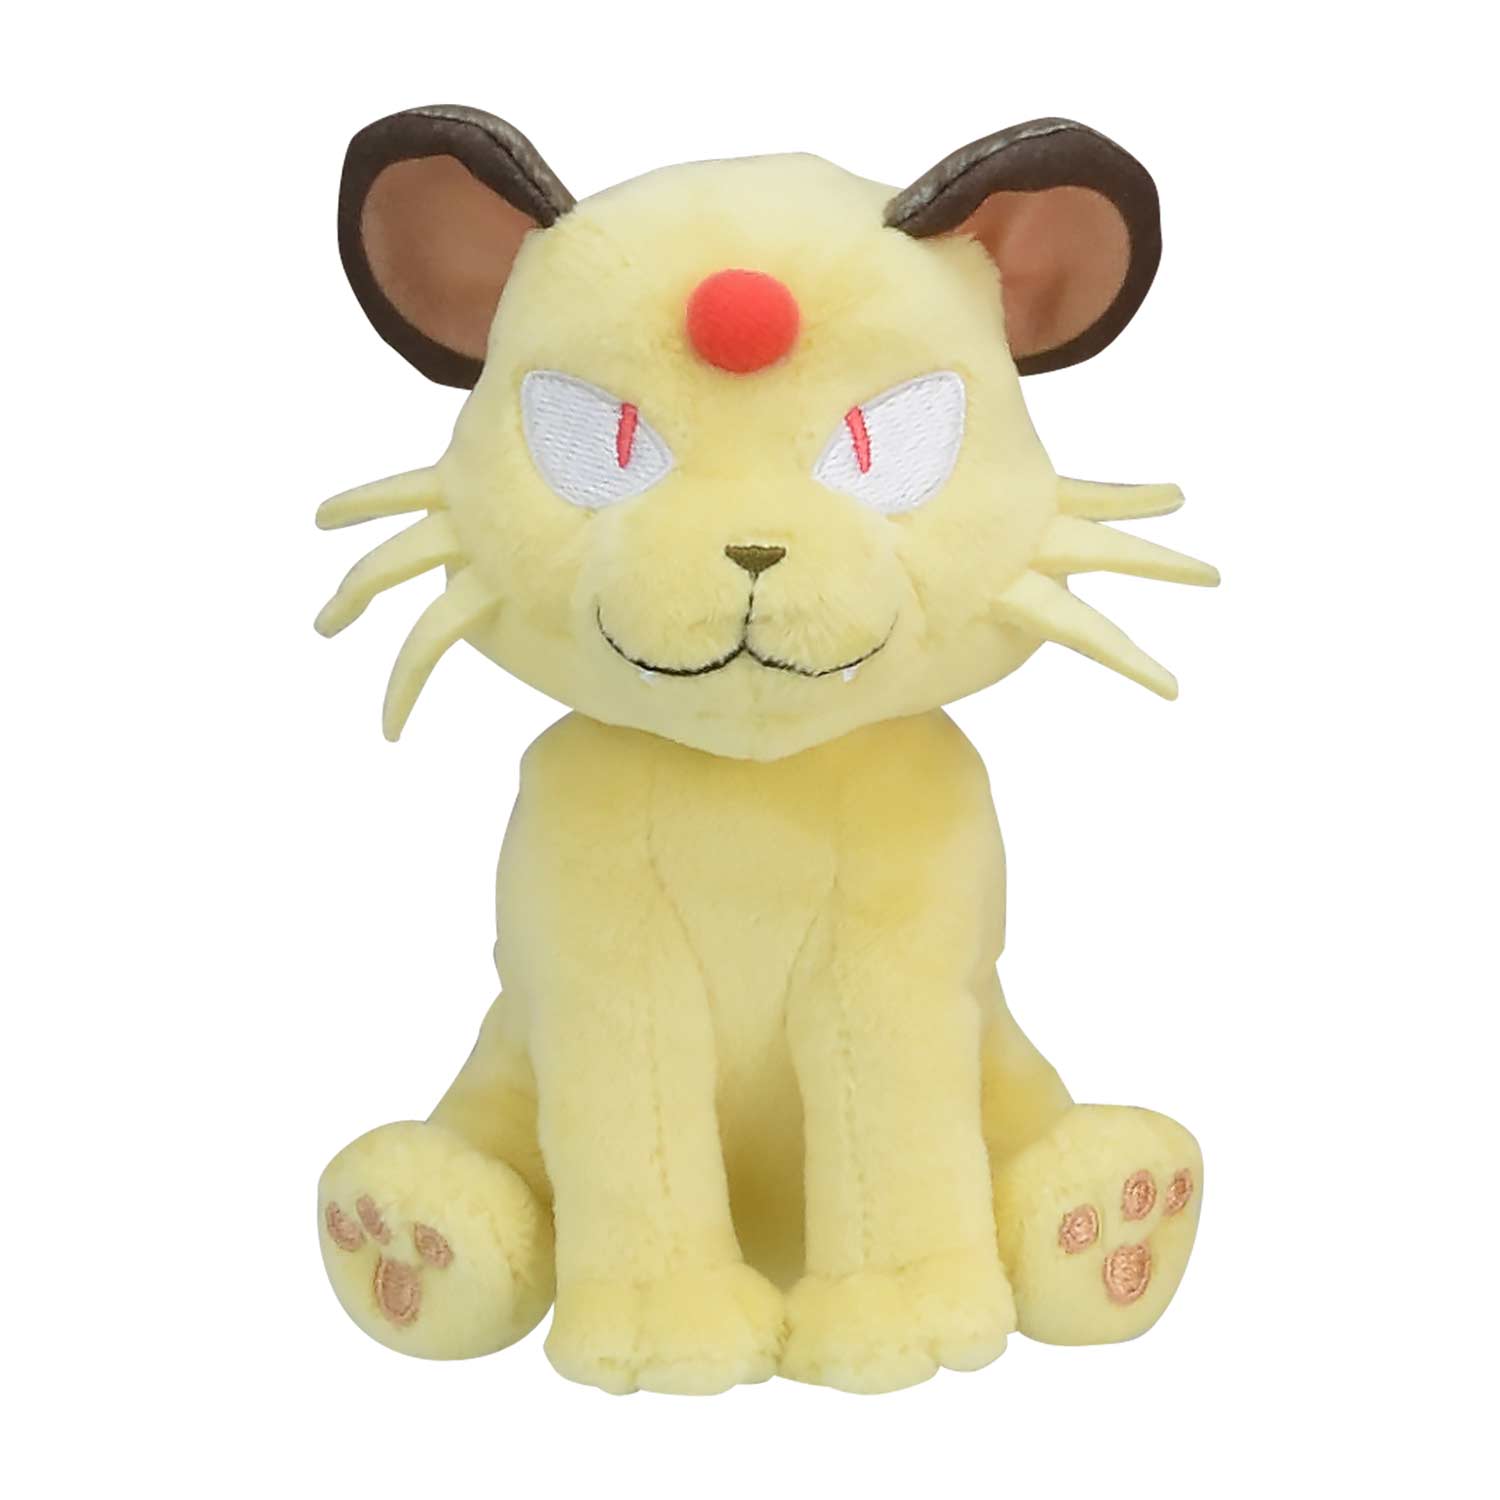 The official Persian Sitting Cuties Plush sits up easily and is a great Pok...